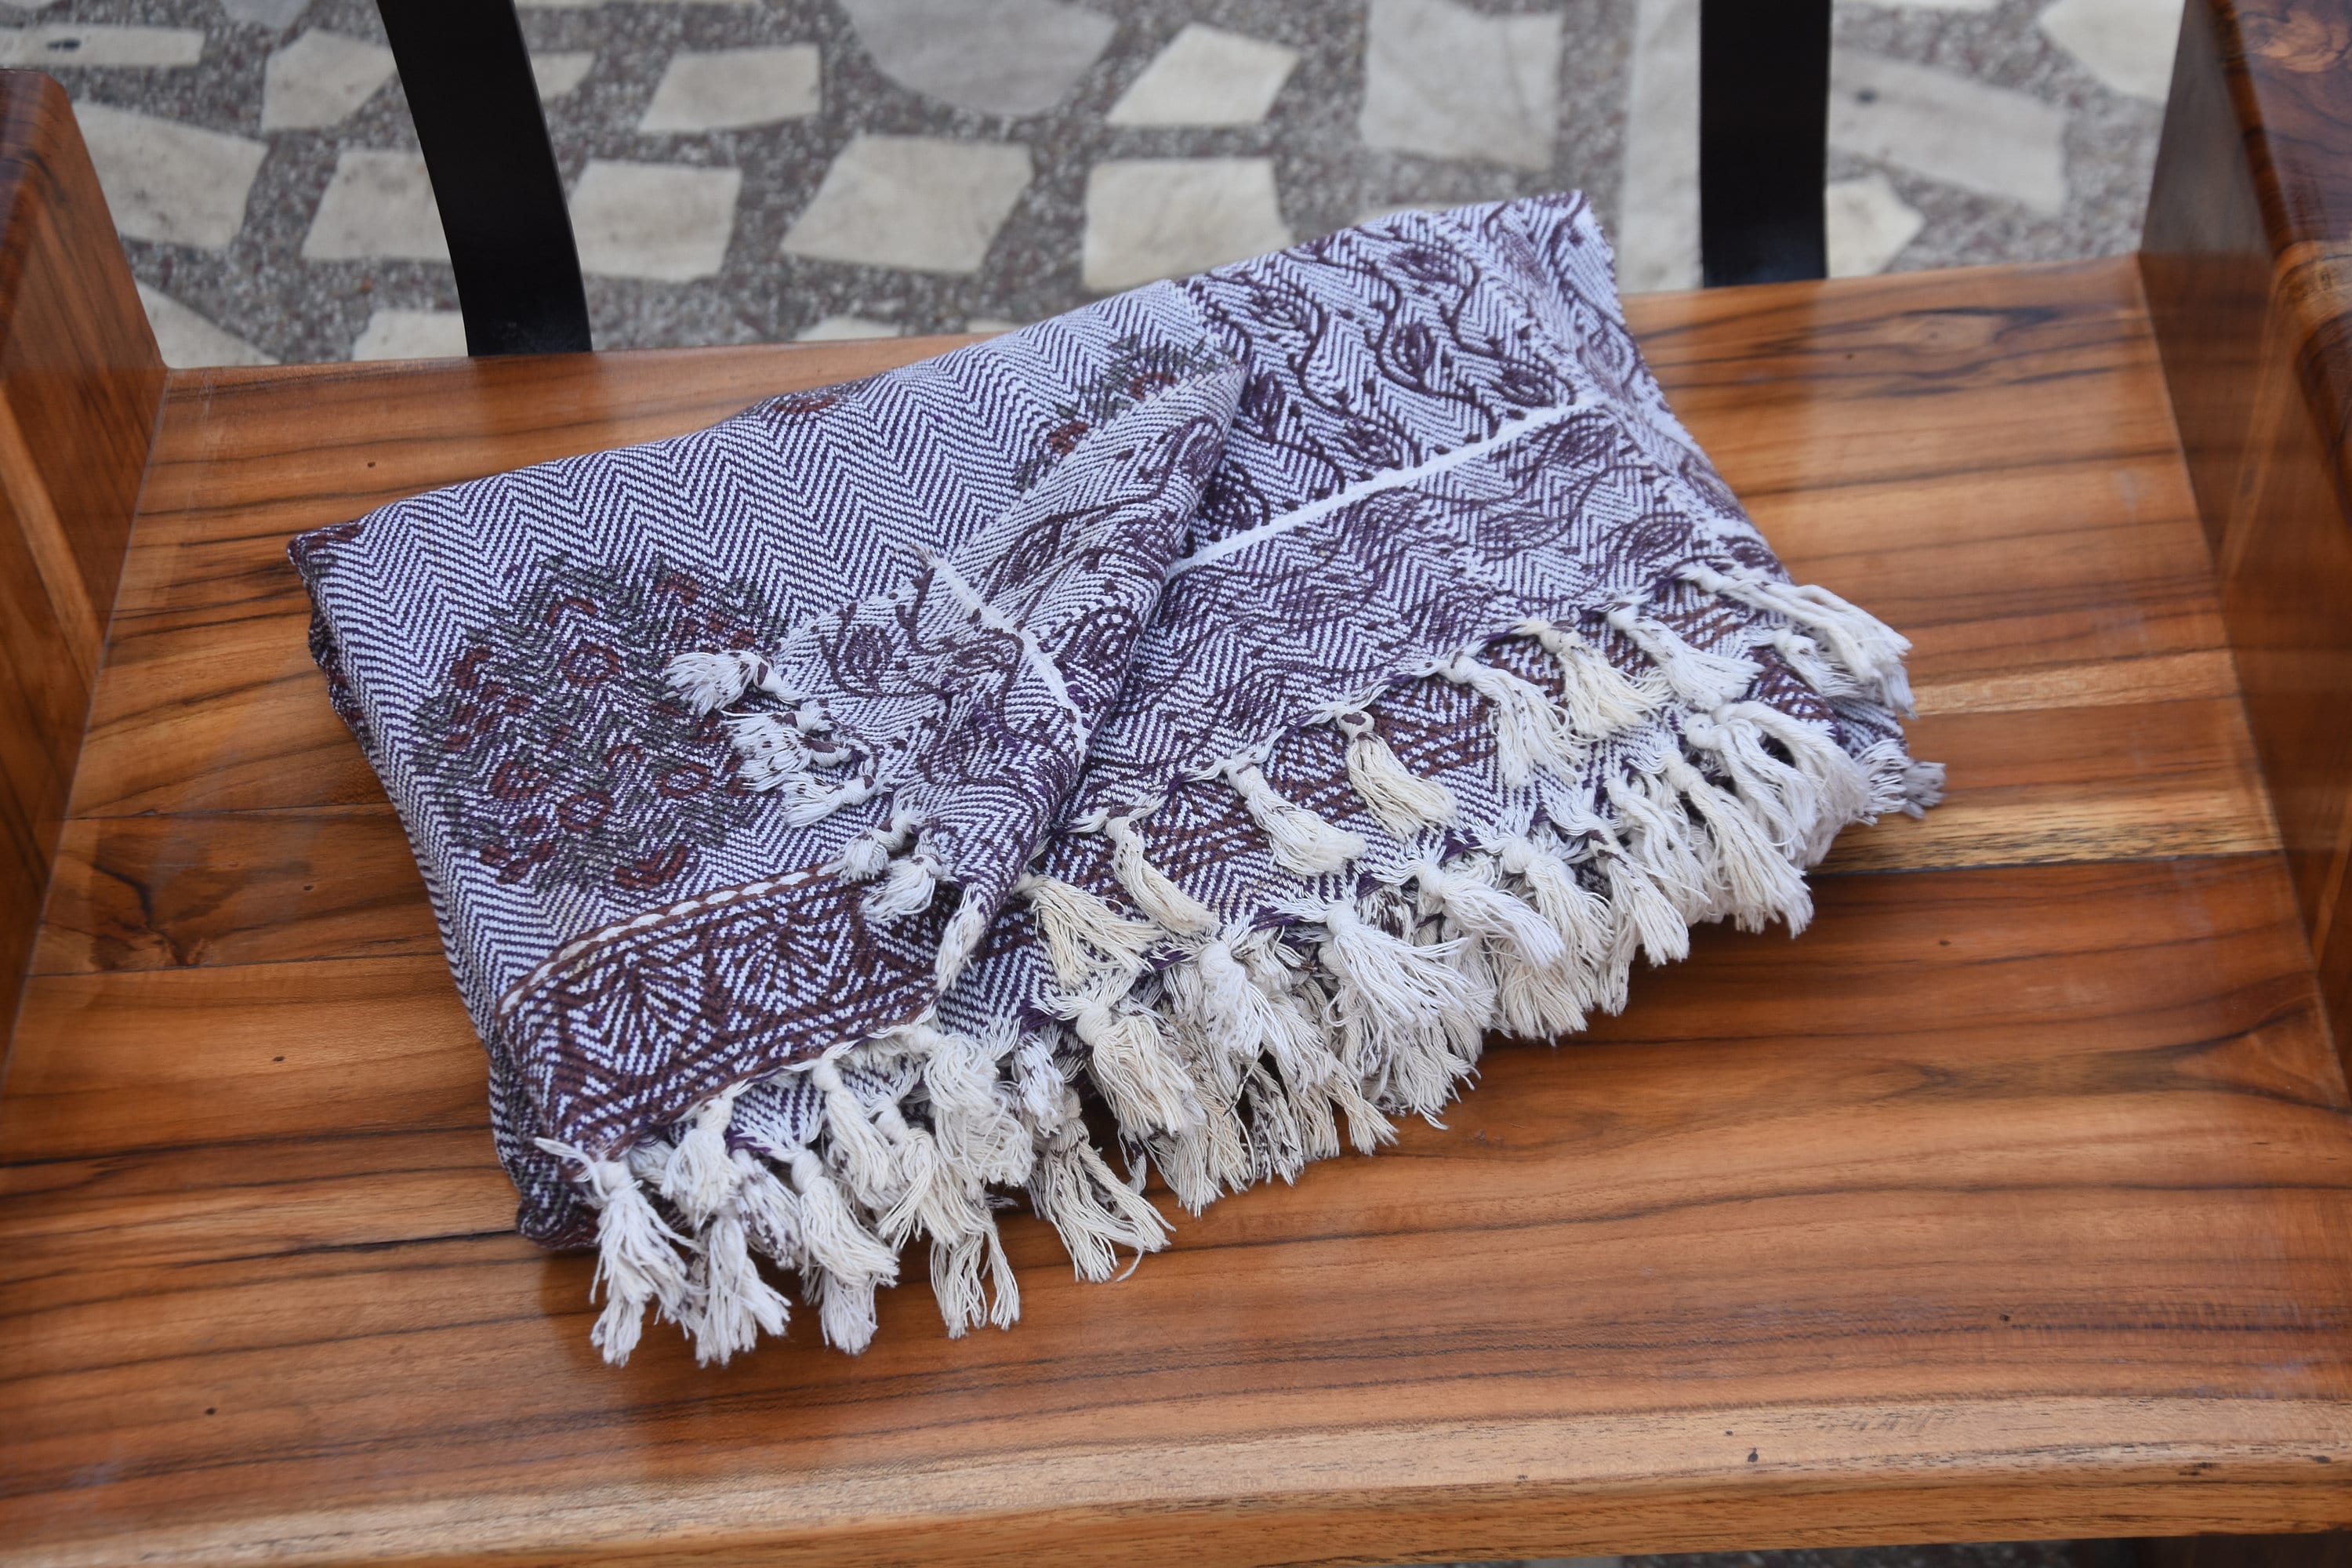 Handwoven throws, block print bed throws, blankets and throws, handmade print throw for sofa, handwoven handloom fabric - GULDASTA